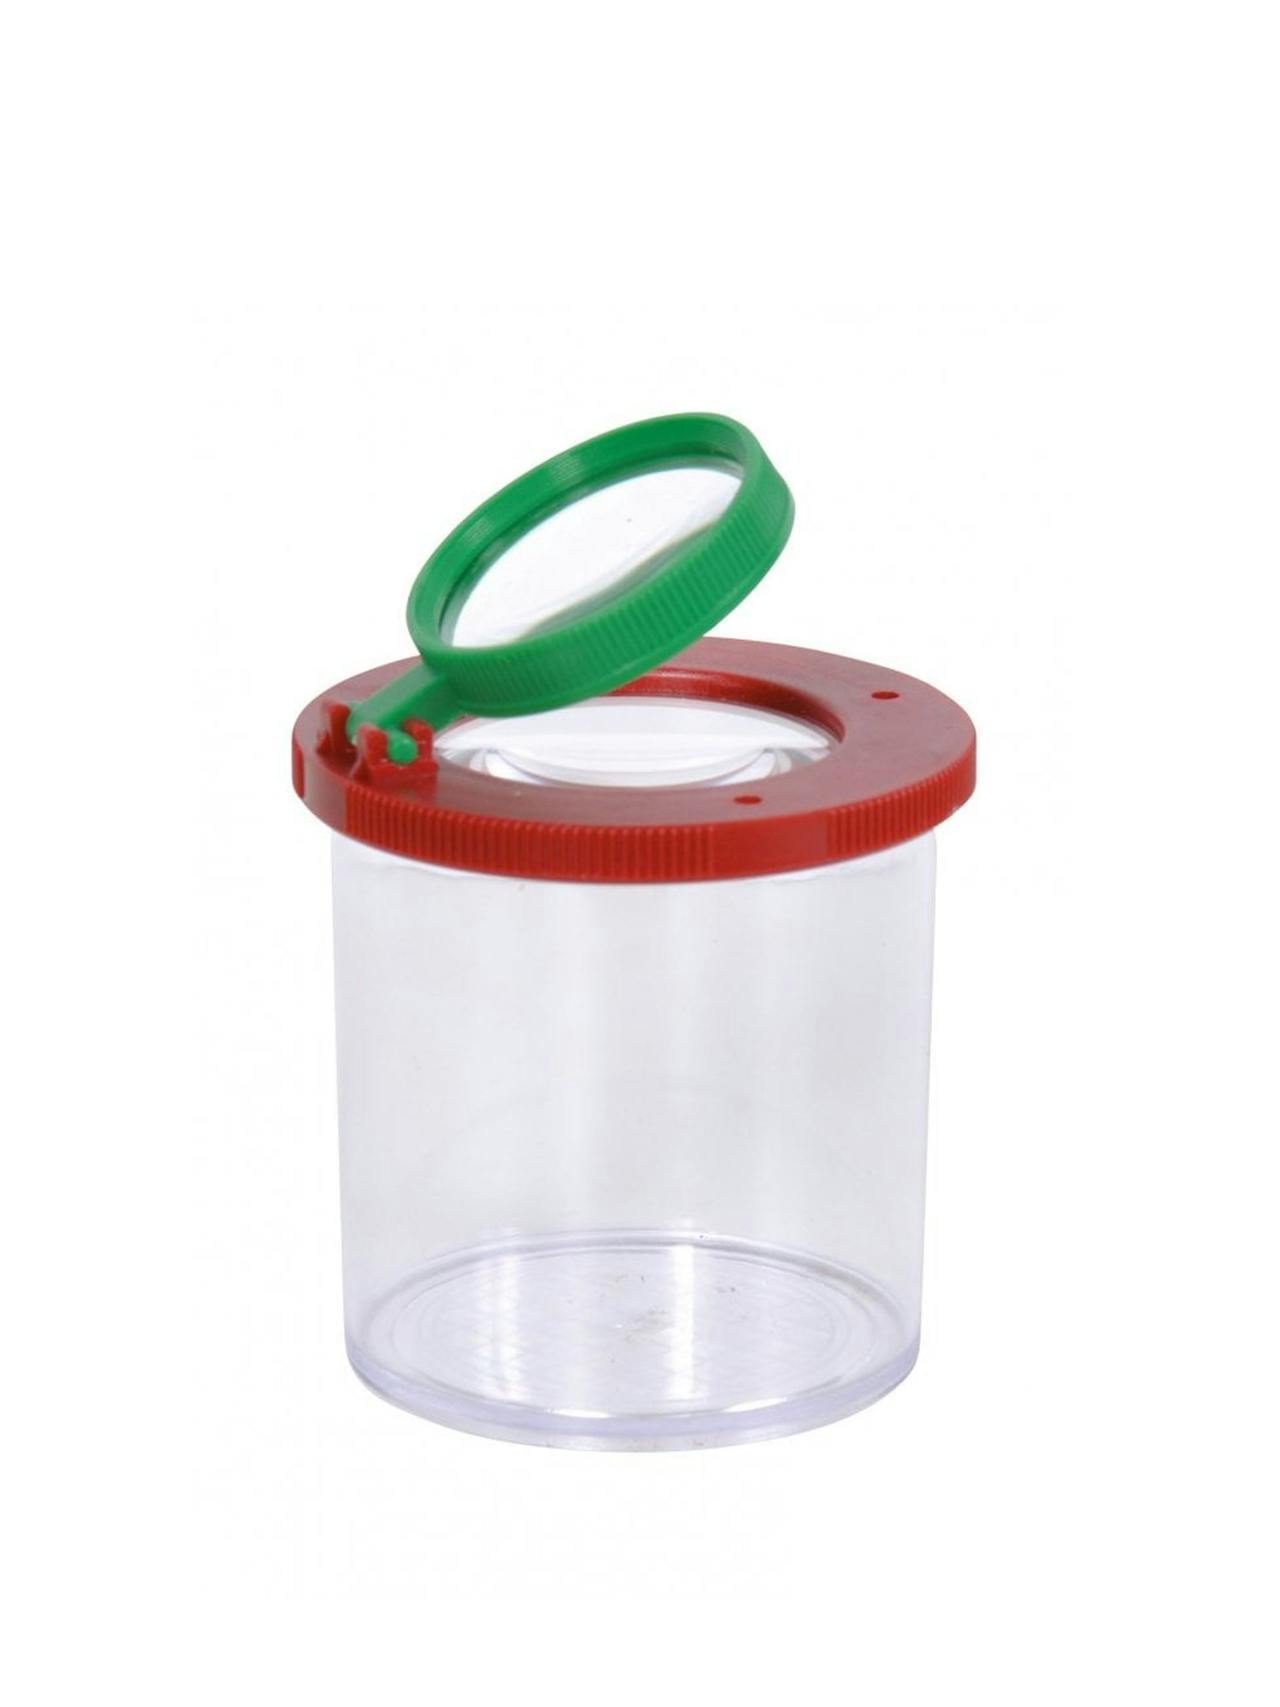 Insect magnifier box